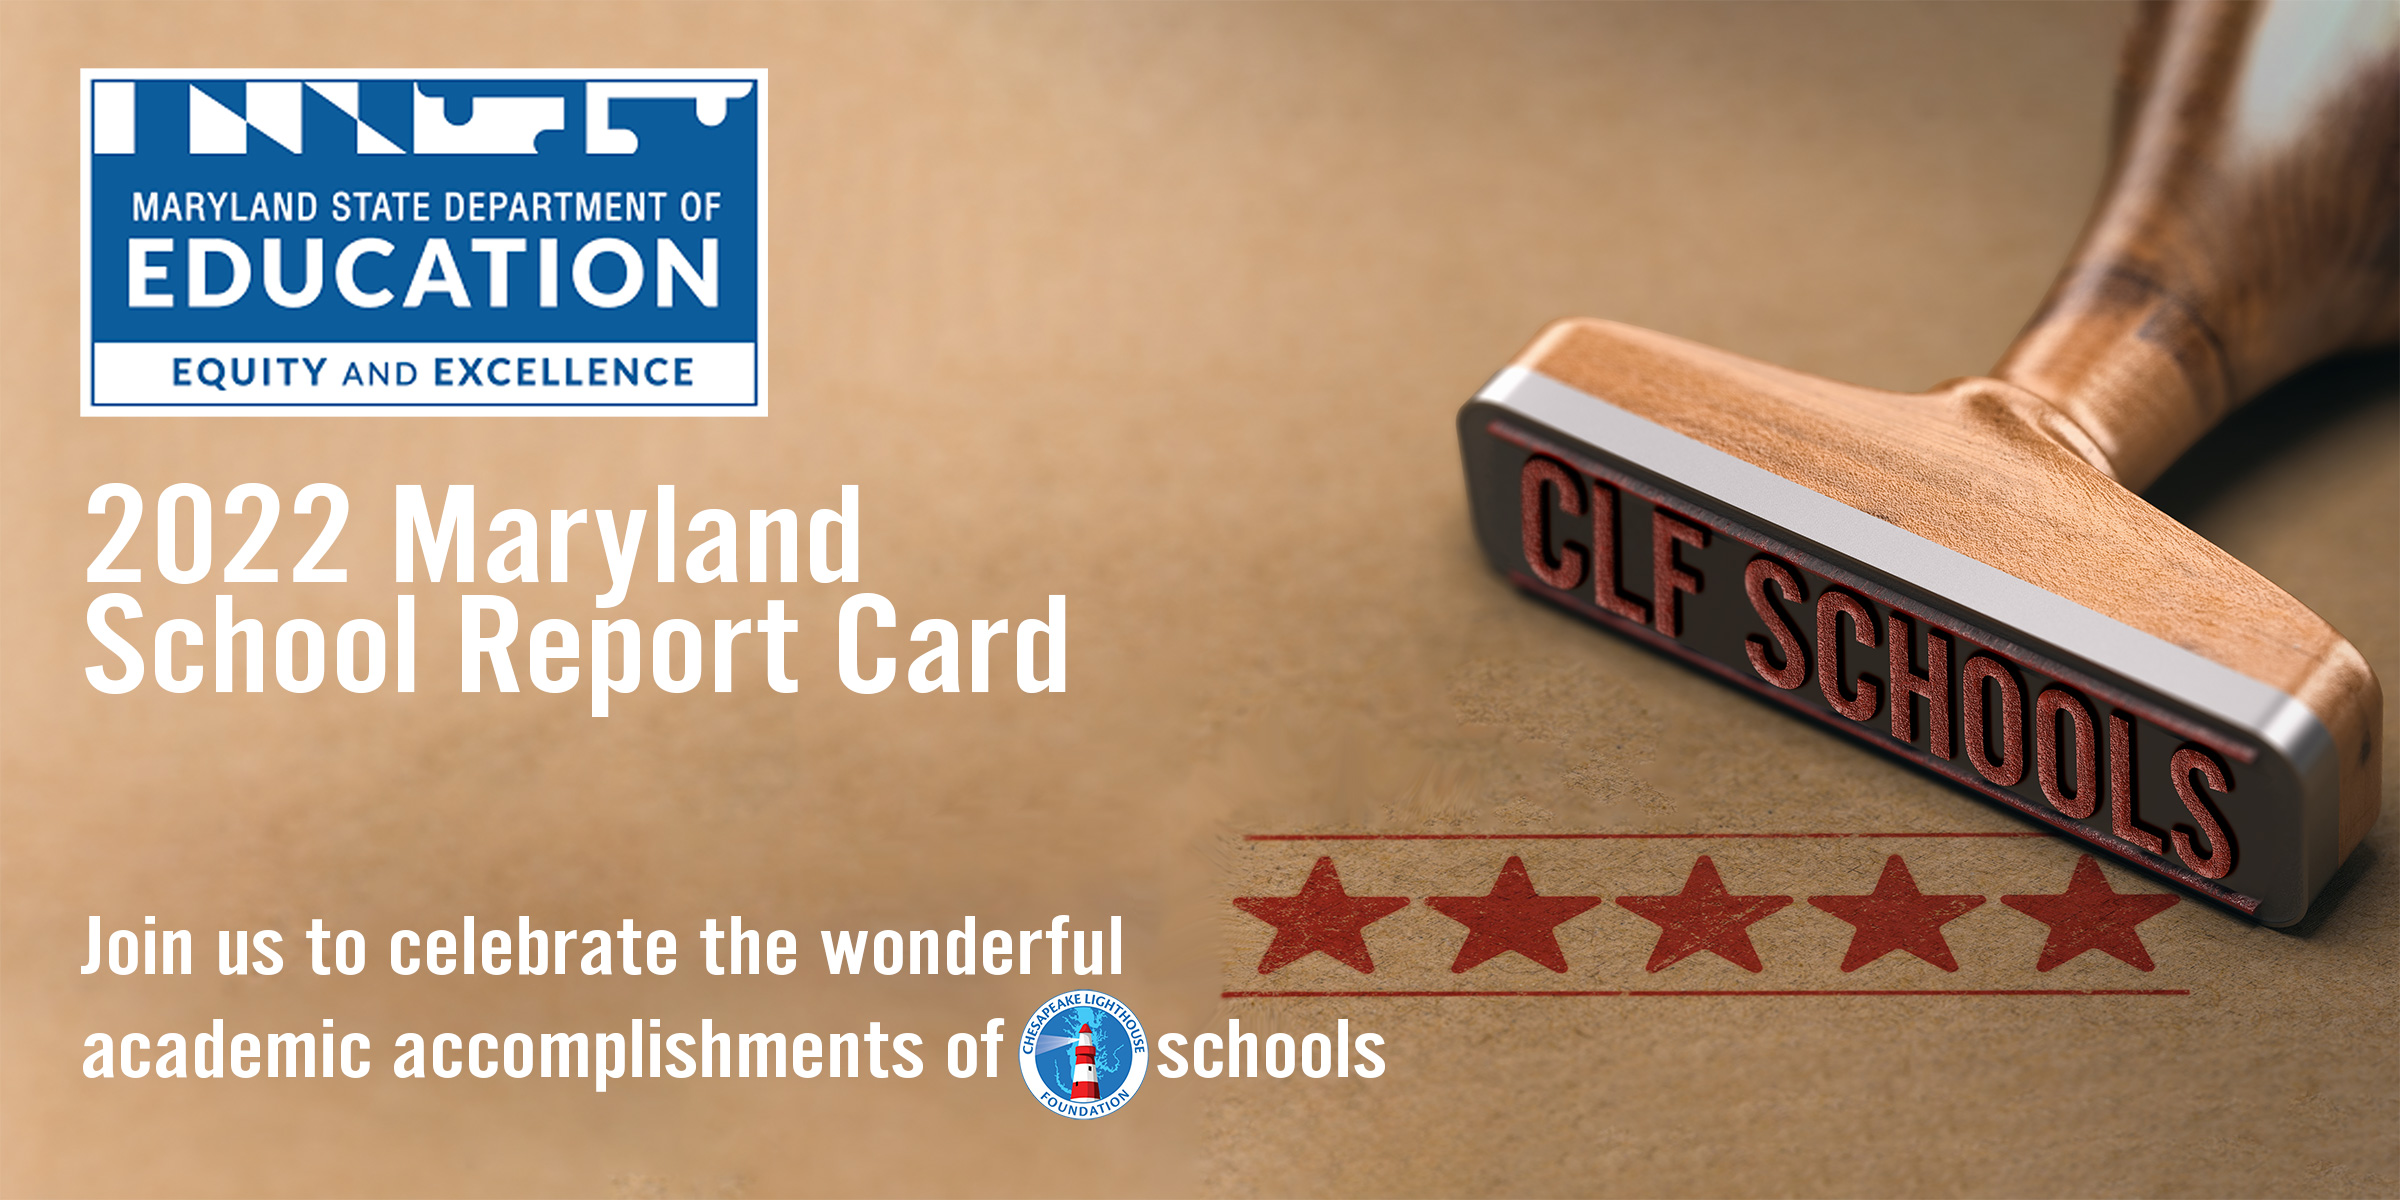 CLF Schools Earn 4 and 5 Star Ratings from MSDE